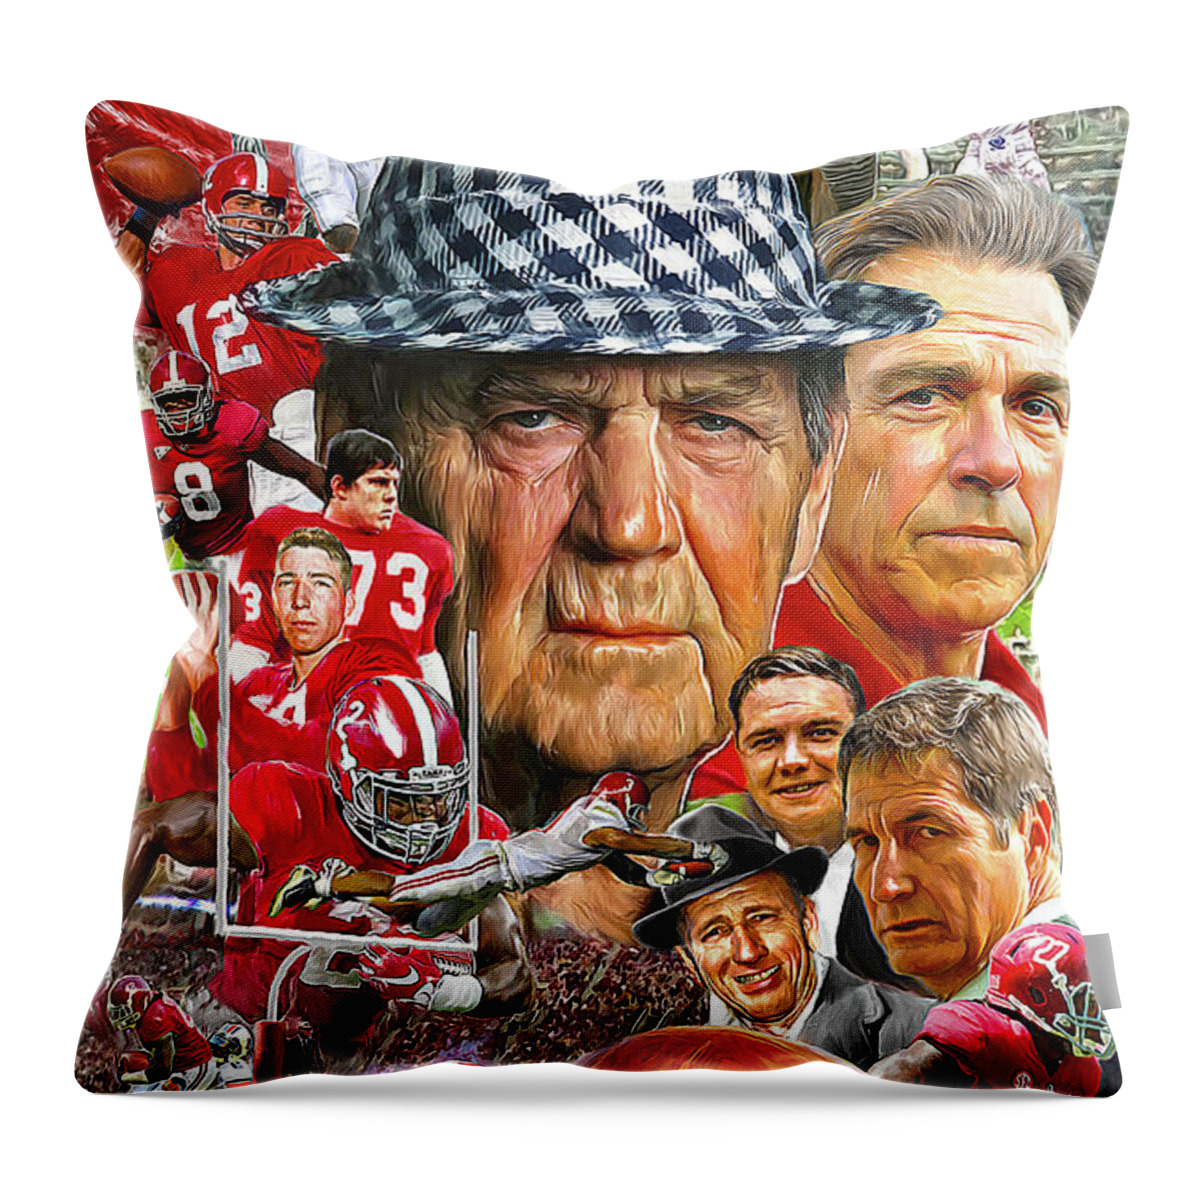 Alabama Football Throw Pillow featuring the painting Alabama Crimson Tide by Mark Spears